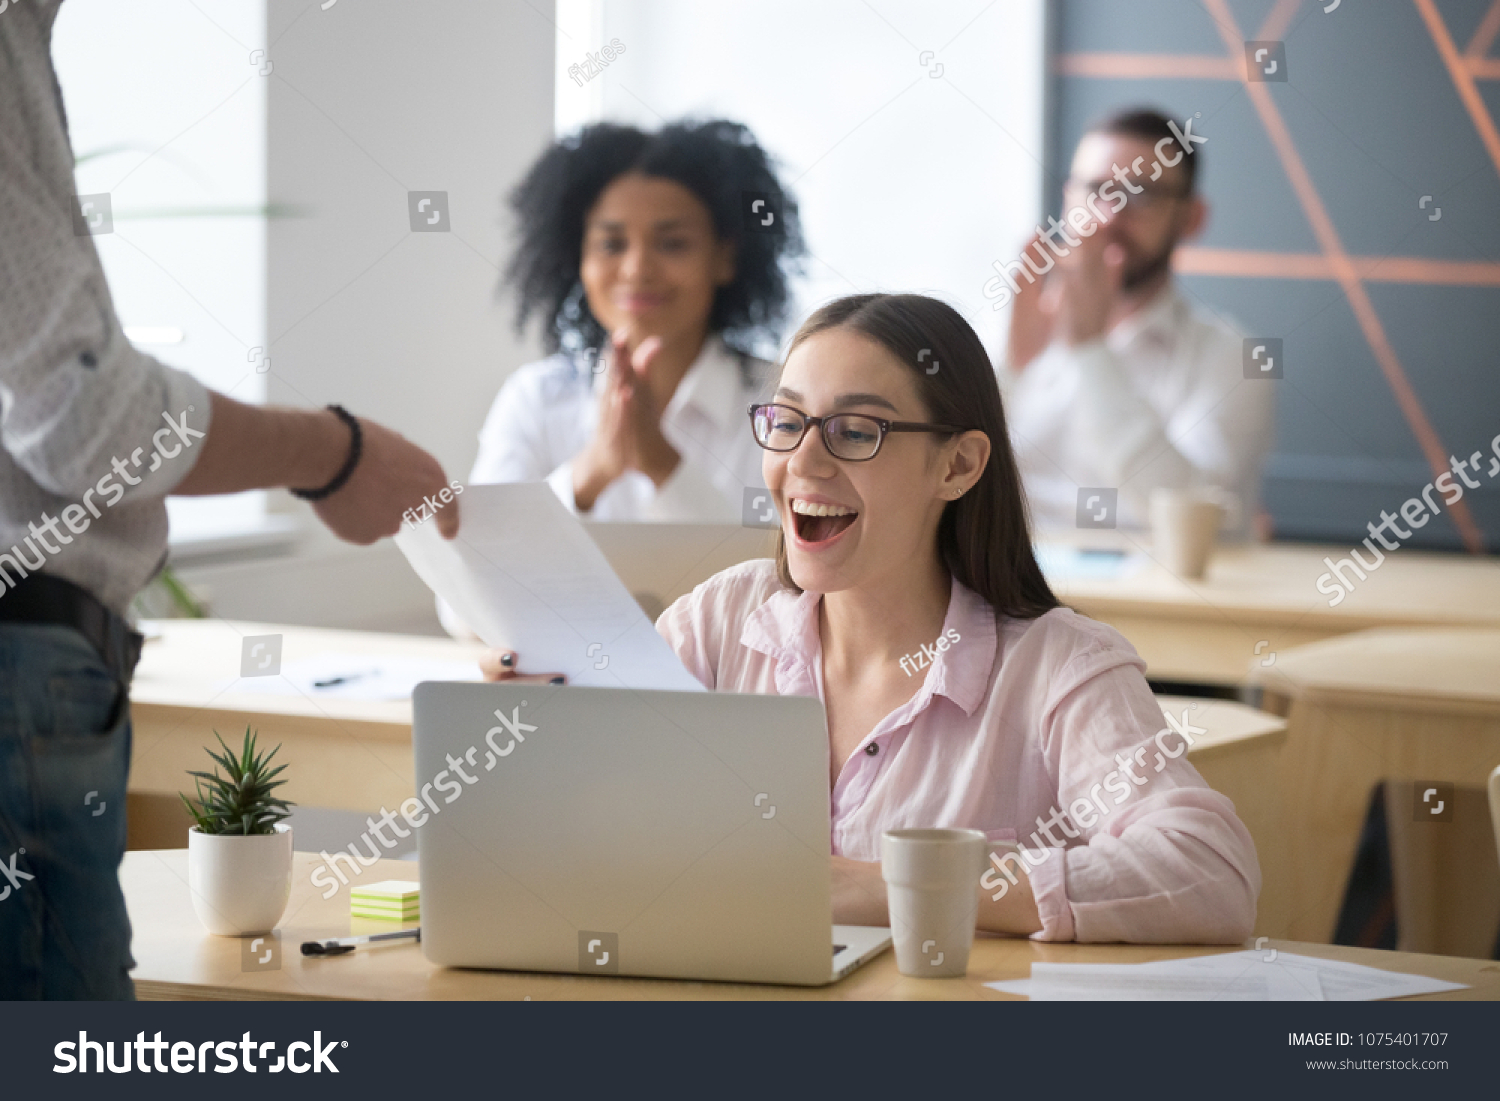 Excited successful student receiving document from boss with good result, colleagues congratulating happy millennial promoted rewarded employee amazed by great news in written notice with applause #1075401707